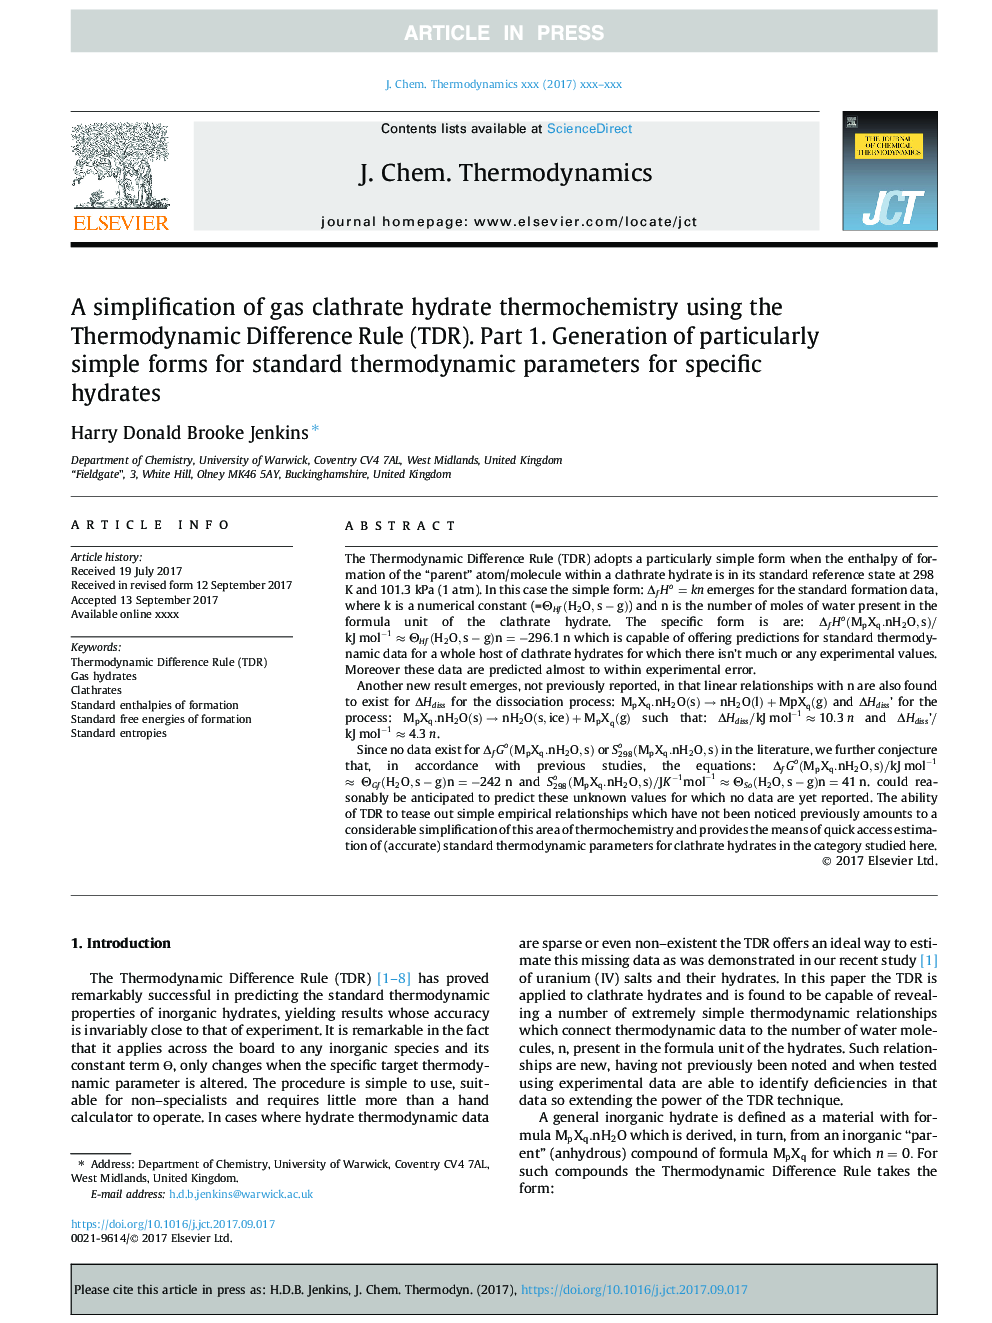 A simplification of gas clathrate hydrate thermochemistry using the Thermodynamic Difference Rule (TDR). Part 1. Generation of particularly simple forms for standard thermodynamic parameters for specific hydrates